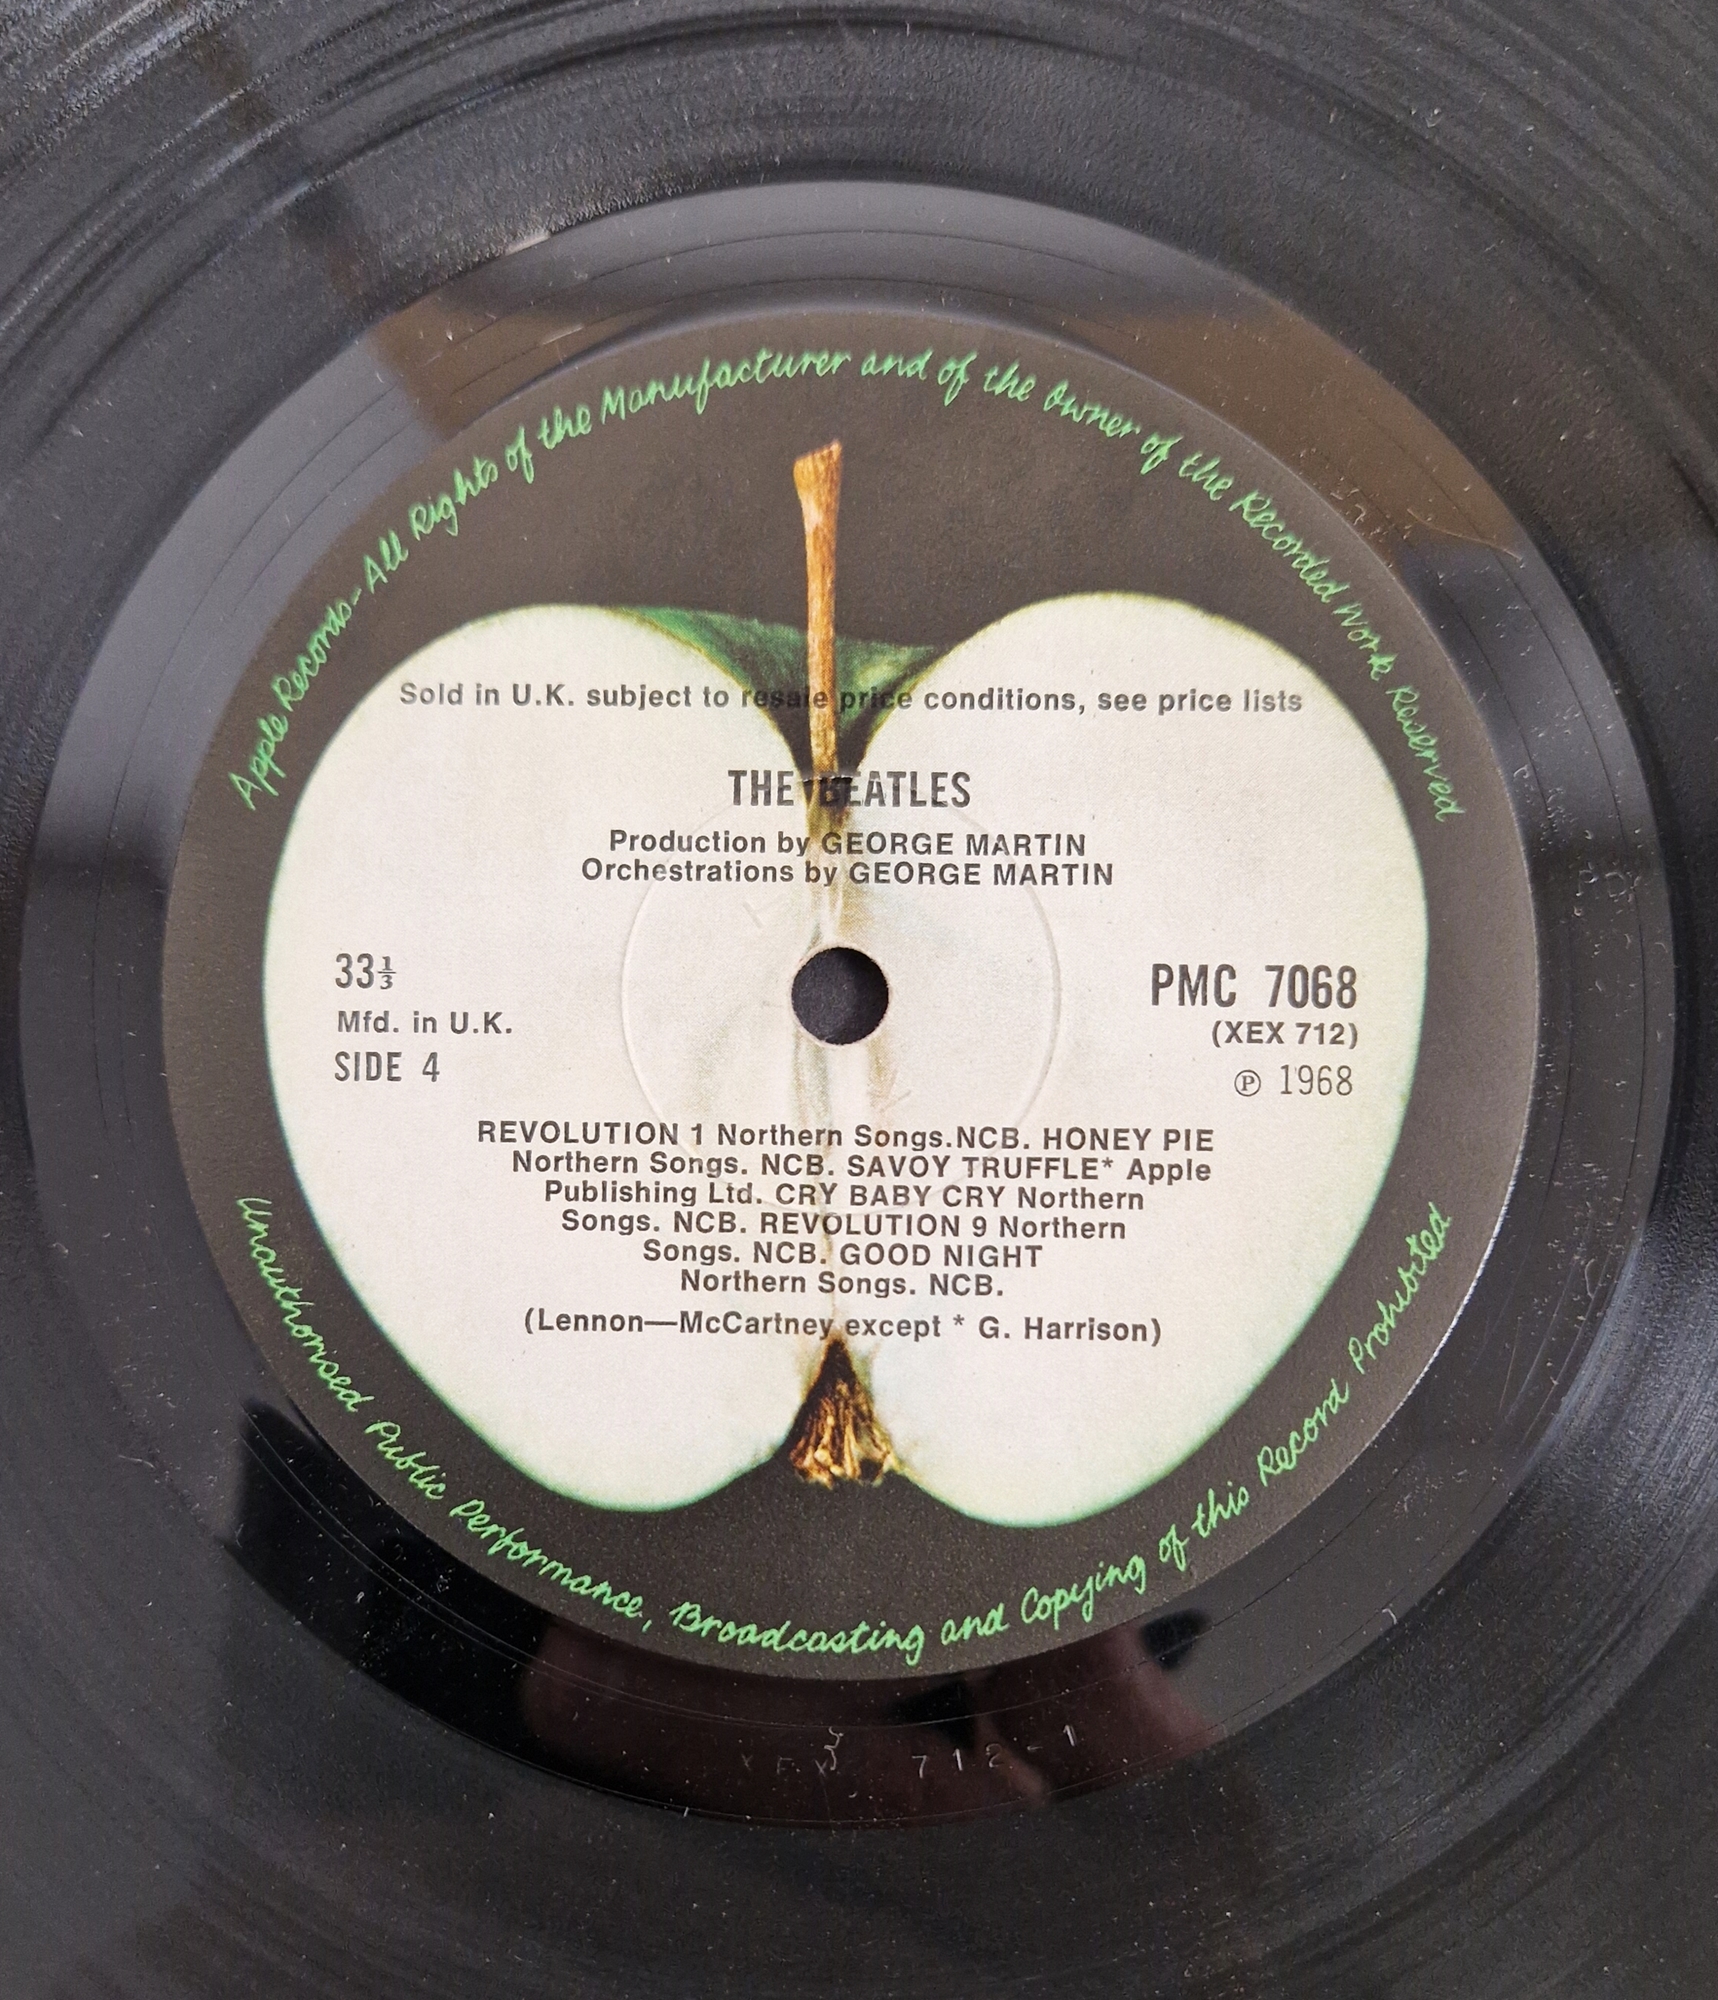 The Beatles, The Beatles (The White Album) PMC7067 (XEX-709/710/711/712-1), Misprint: does not - Image 3 of 5